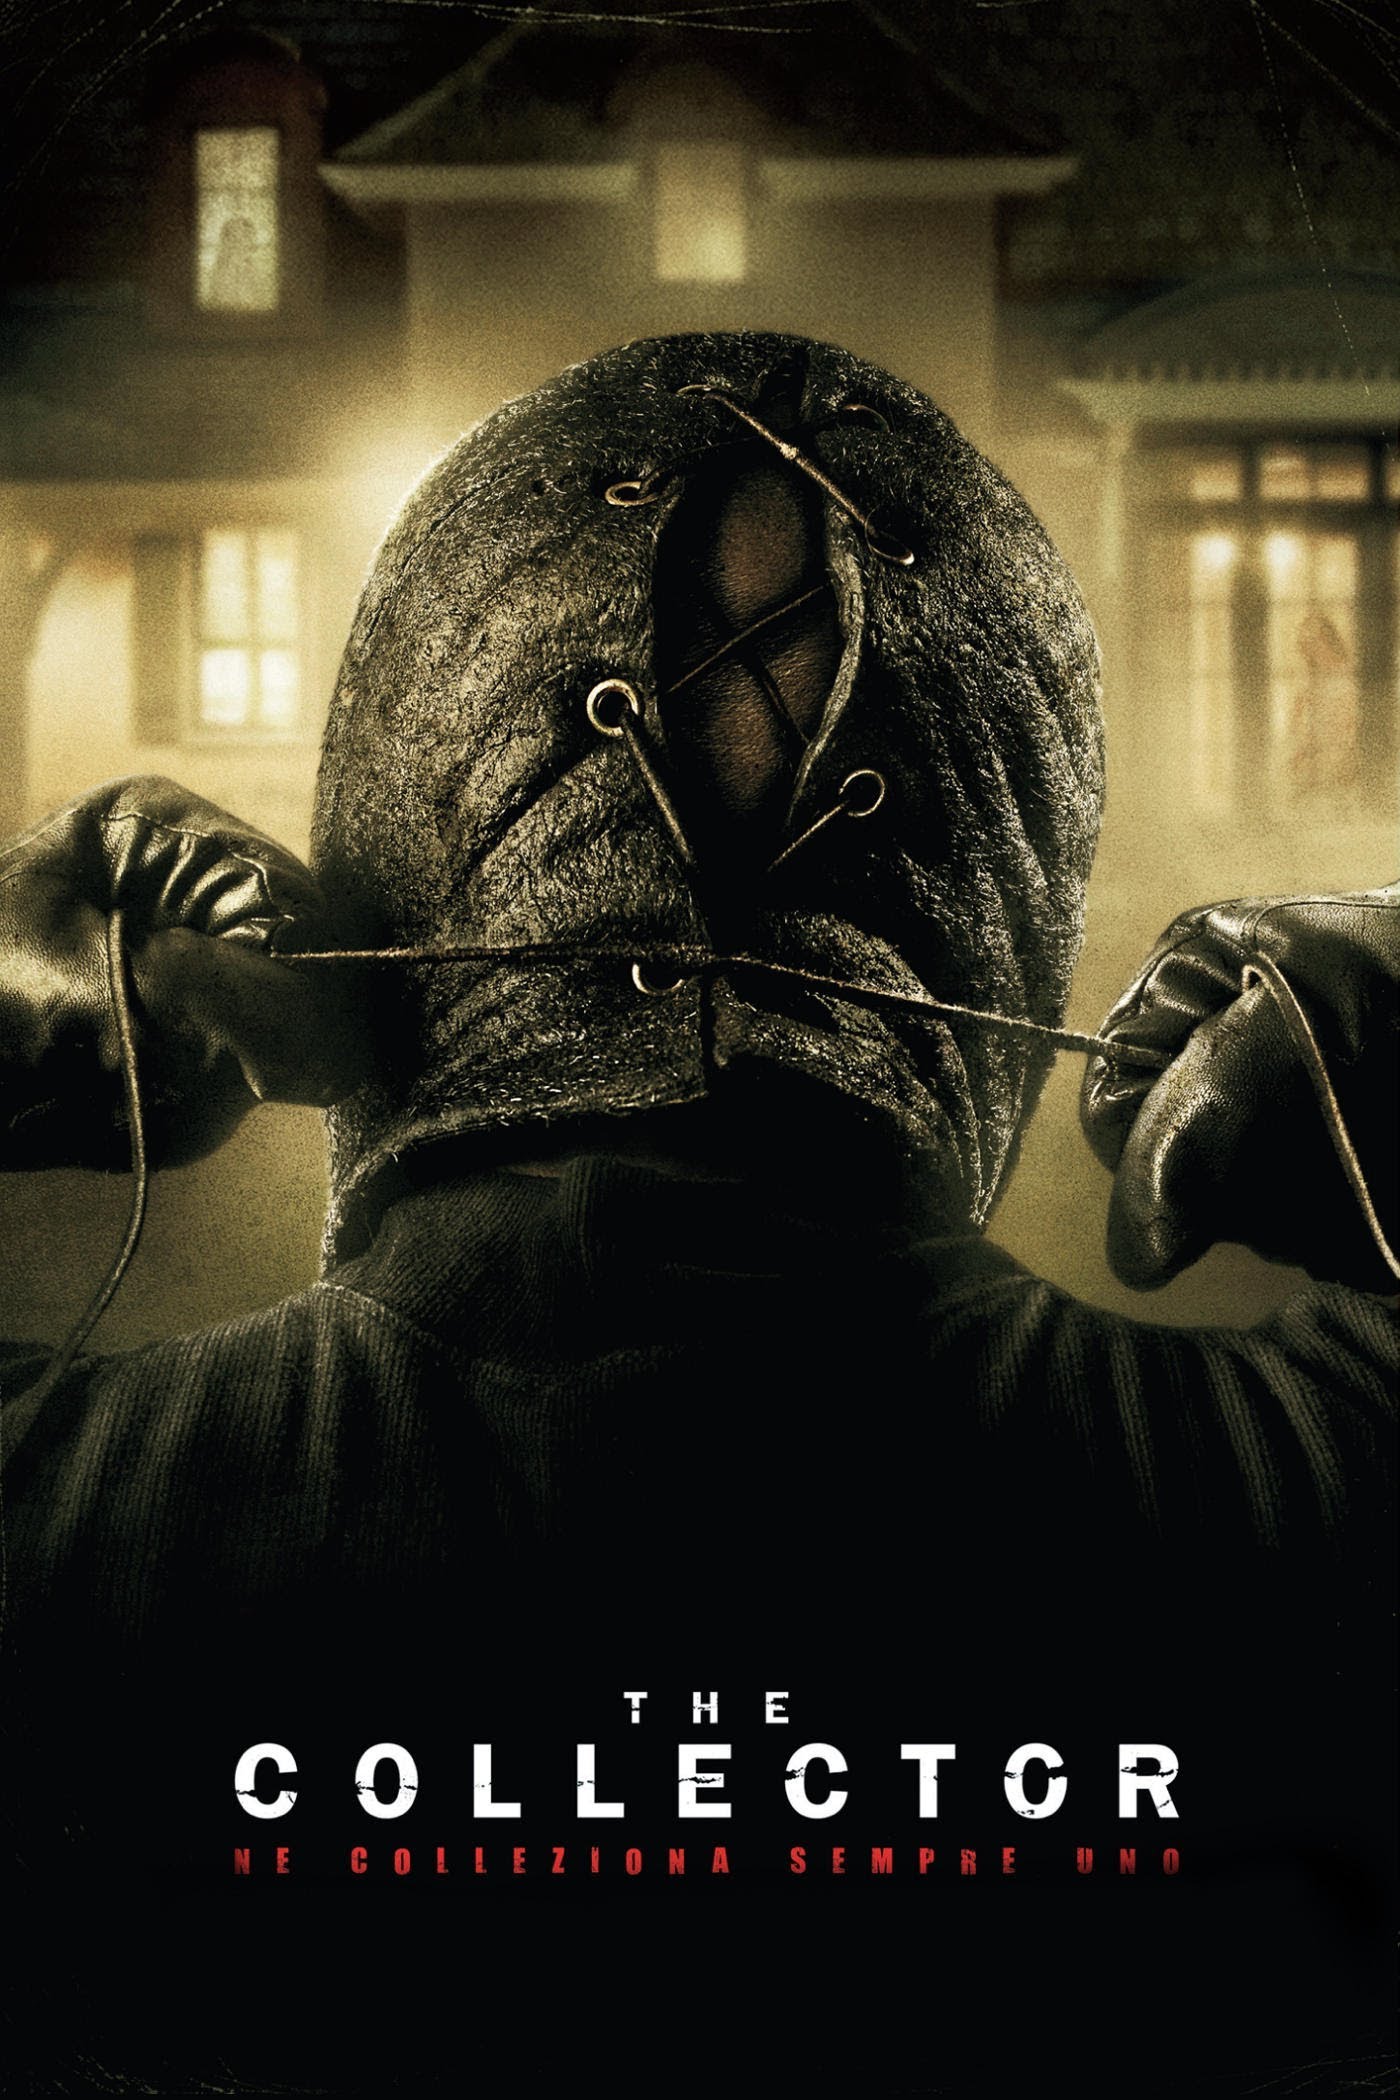 The Collector [HD] (2009)